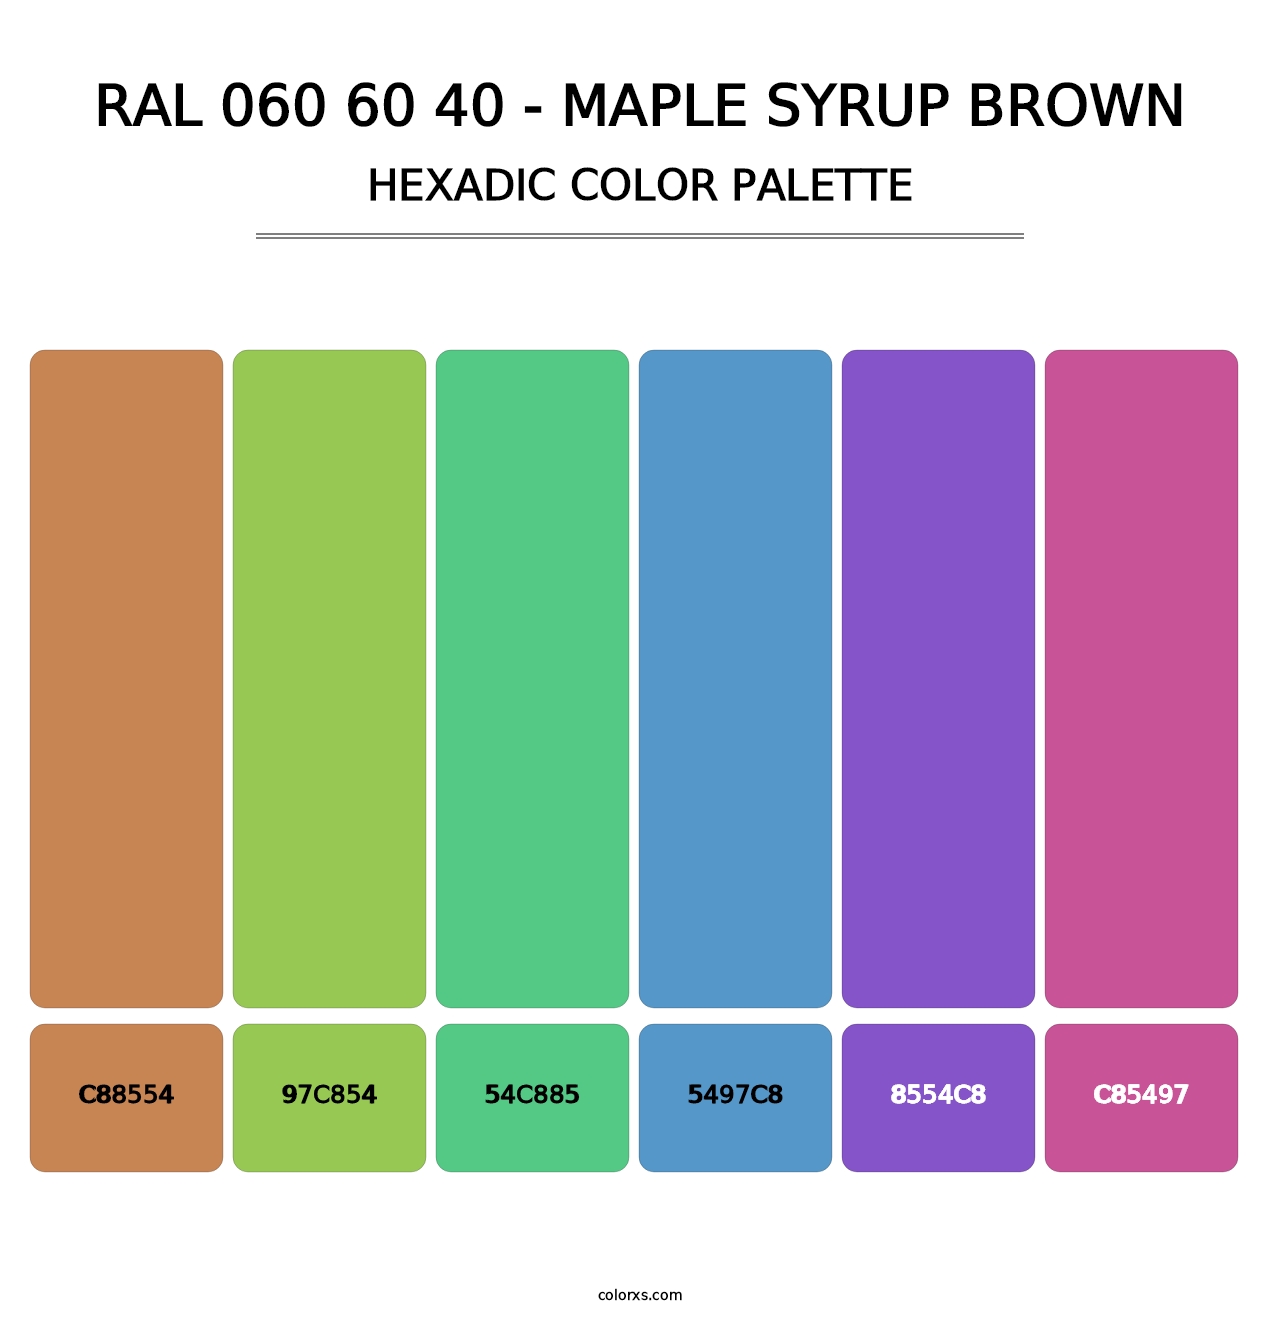 RAL 060 60 40 - Maple Syrup Brown - Hexadic Color Palette